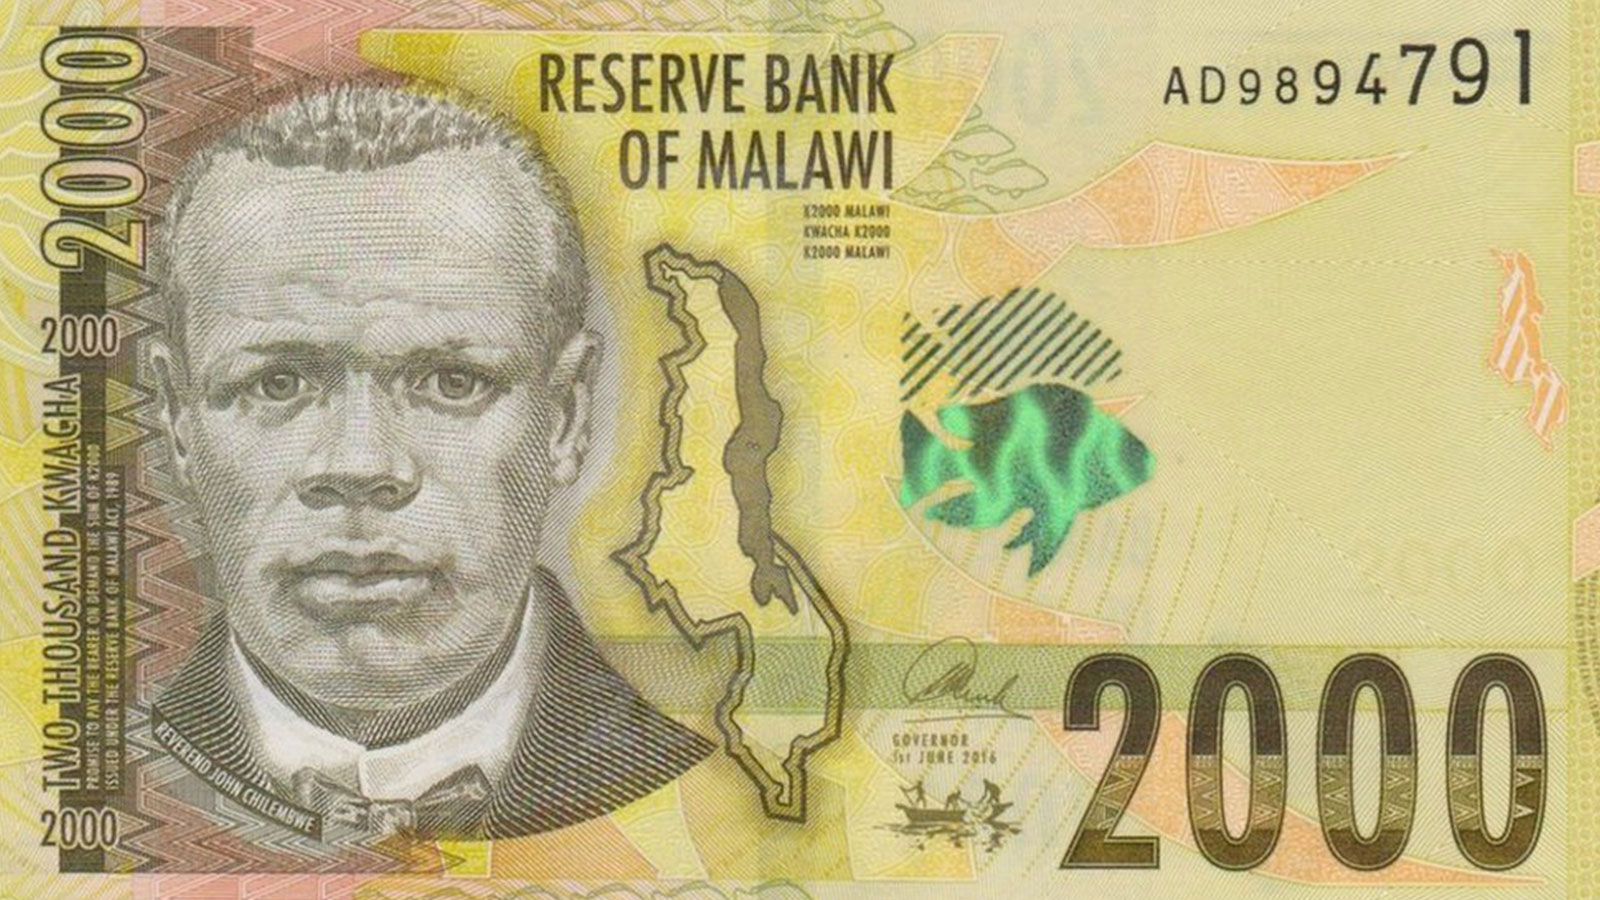 Chilembwe's image appears on Malawian bank notes